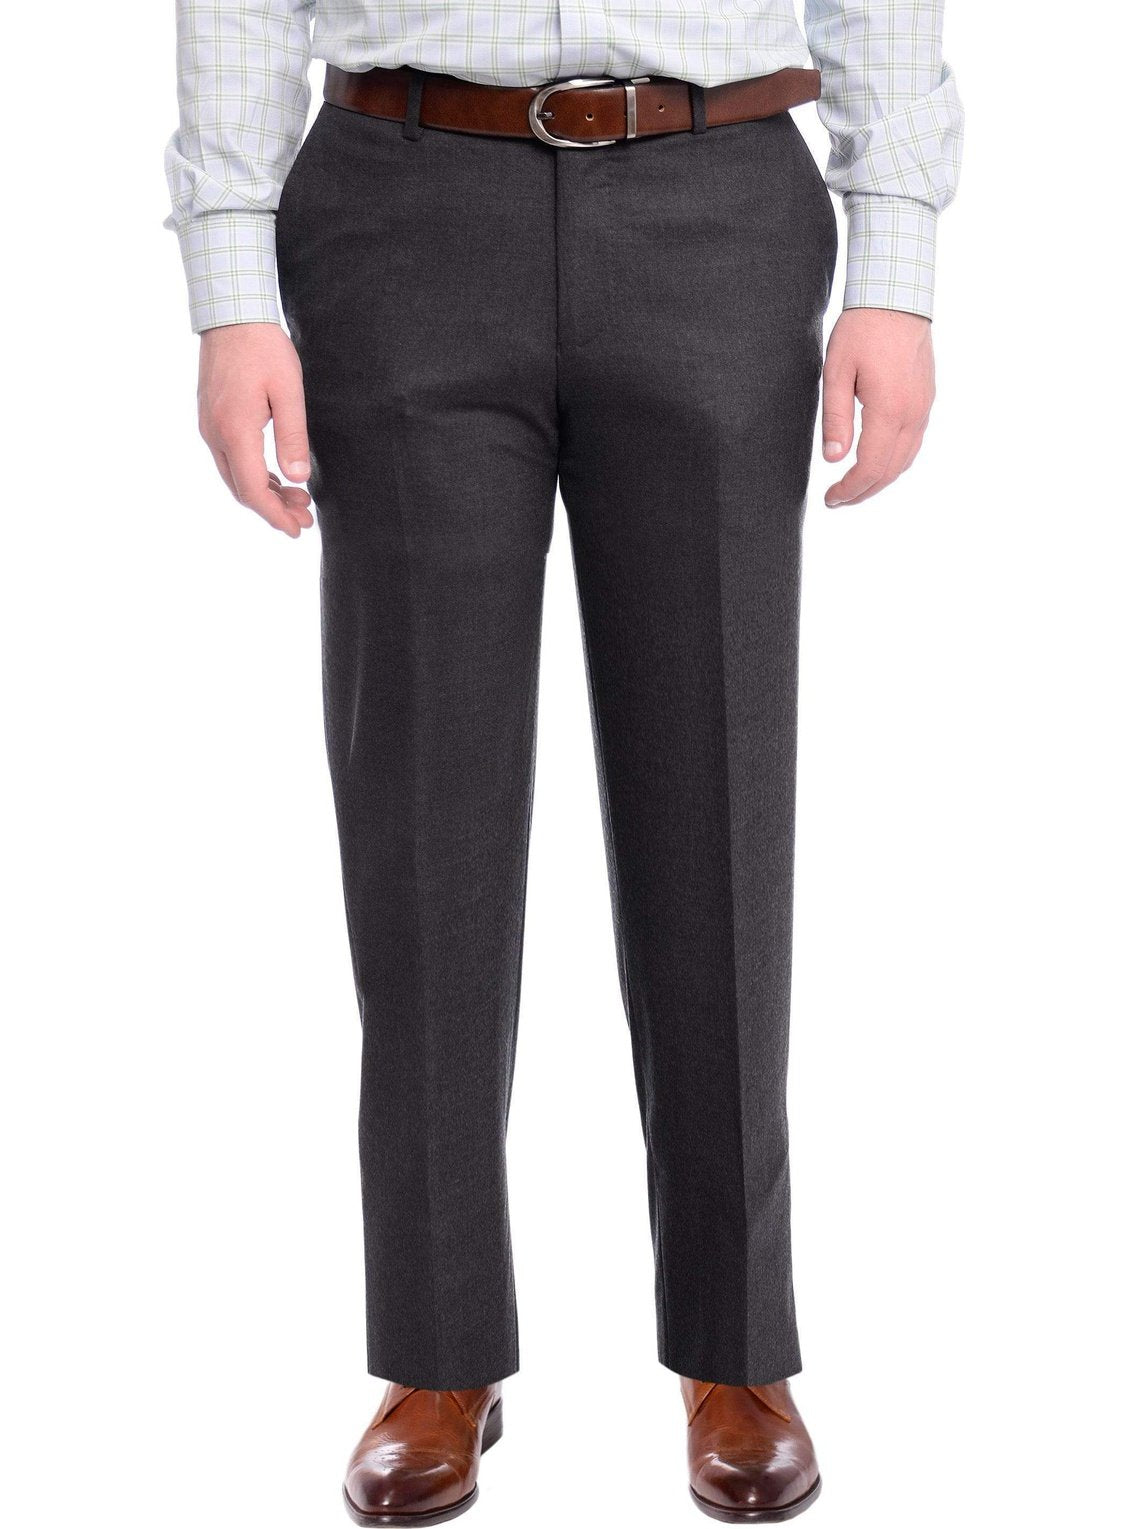 Napoli PANTS Napoli Slim Fit Solid Charcoal Gray Flat Front Flannel Wool Dress Pants